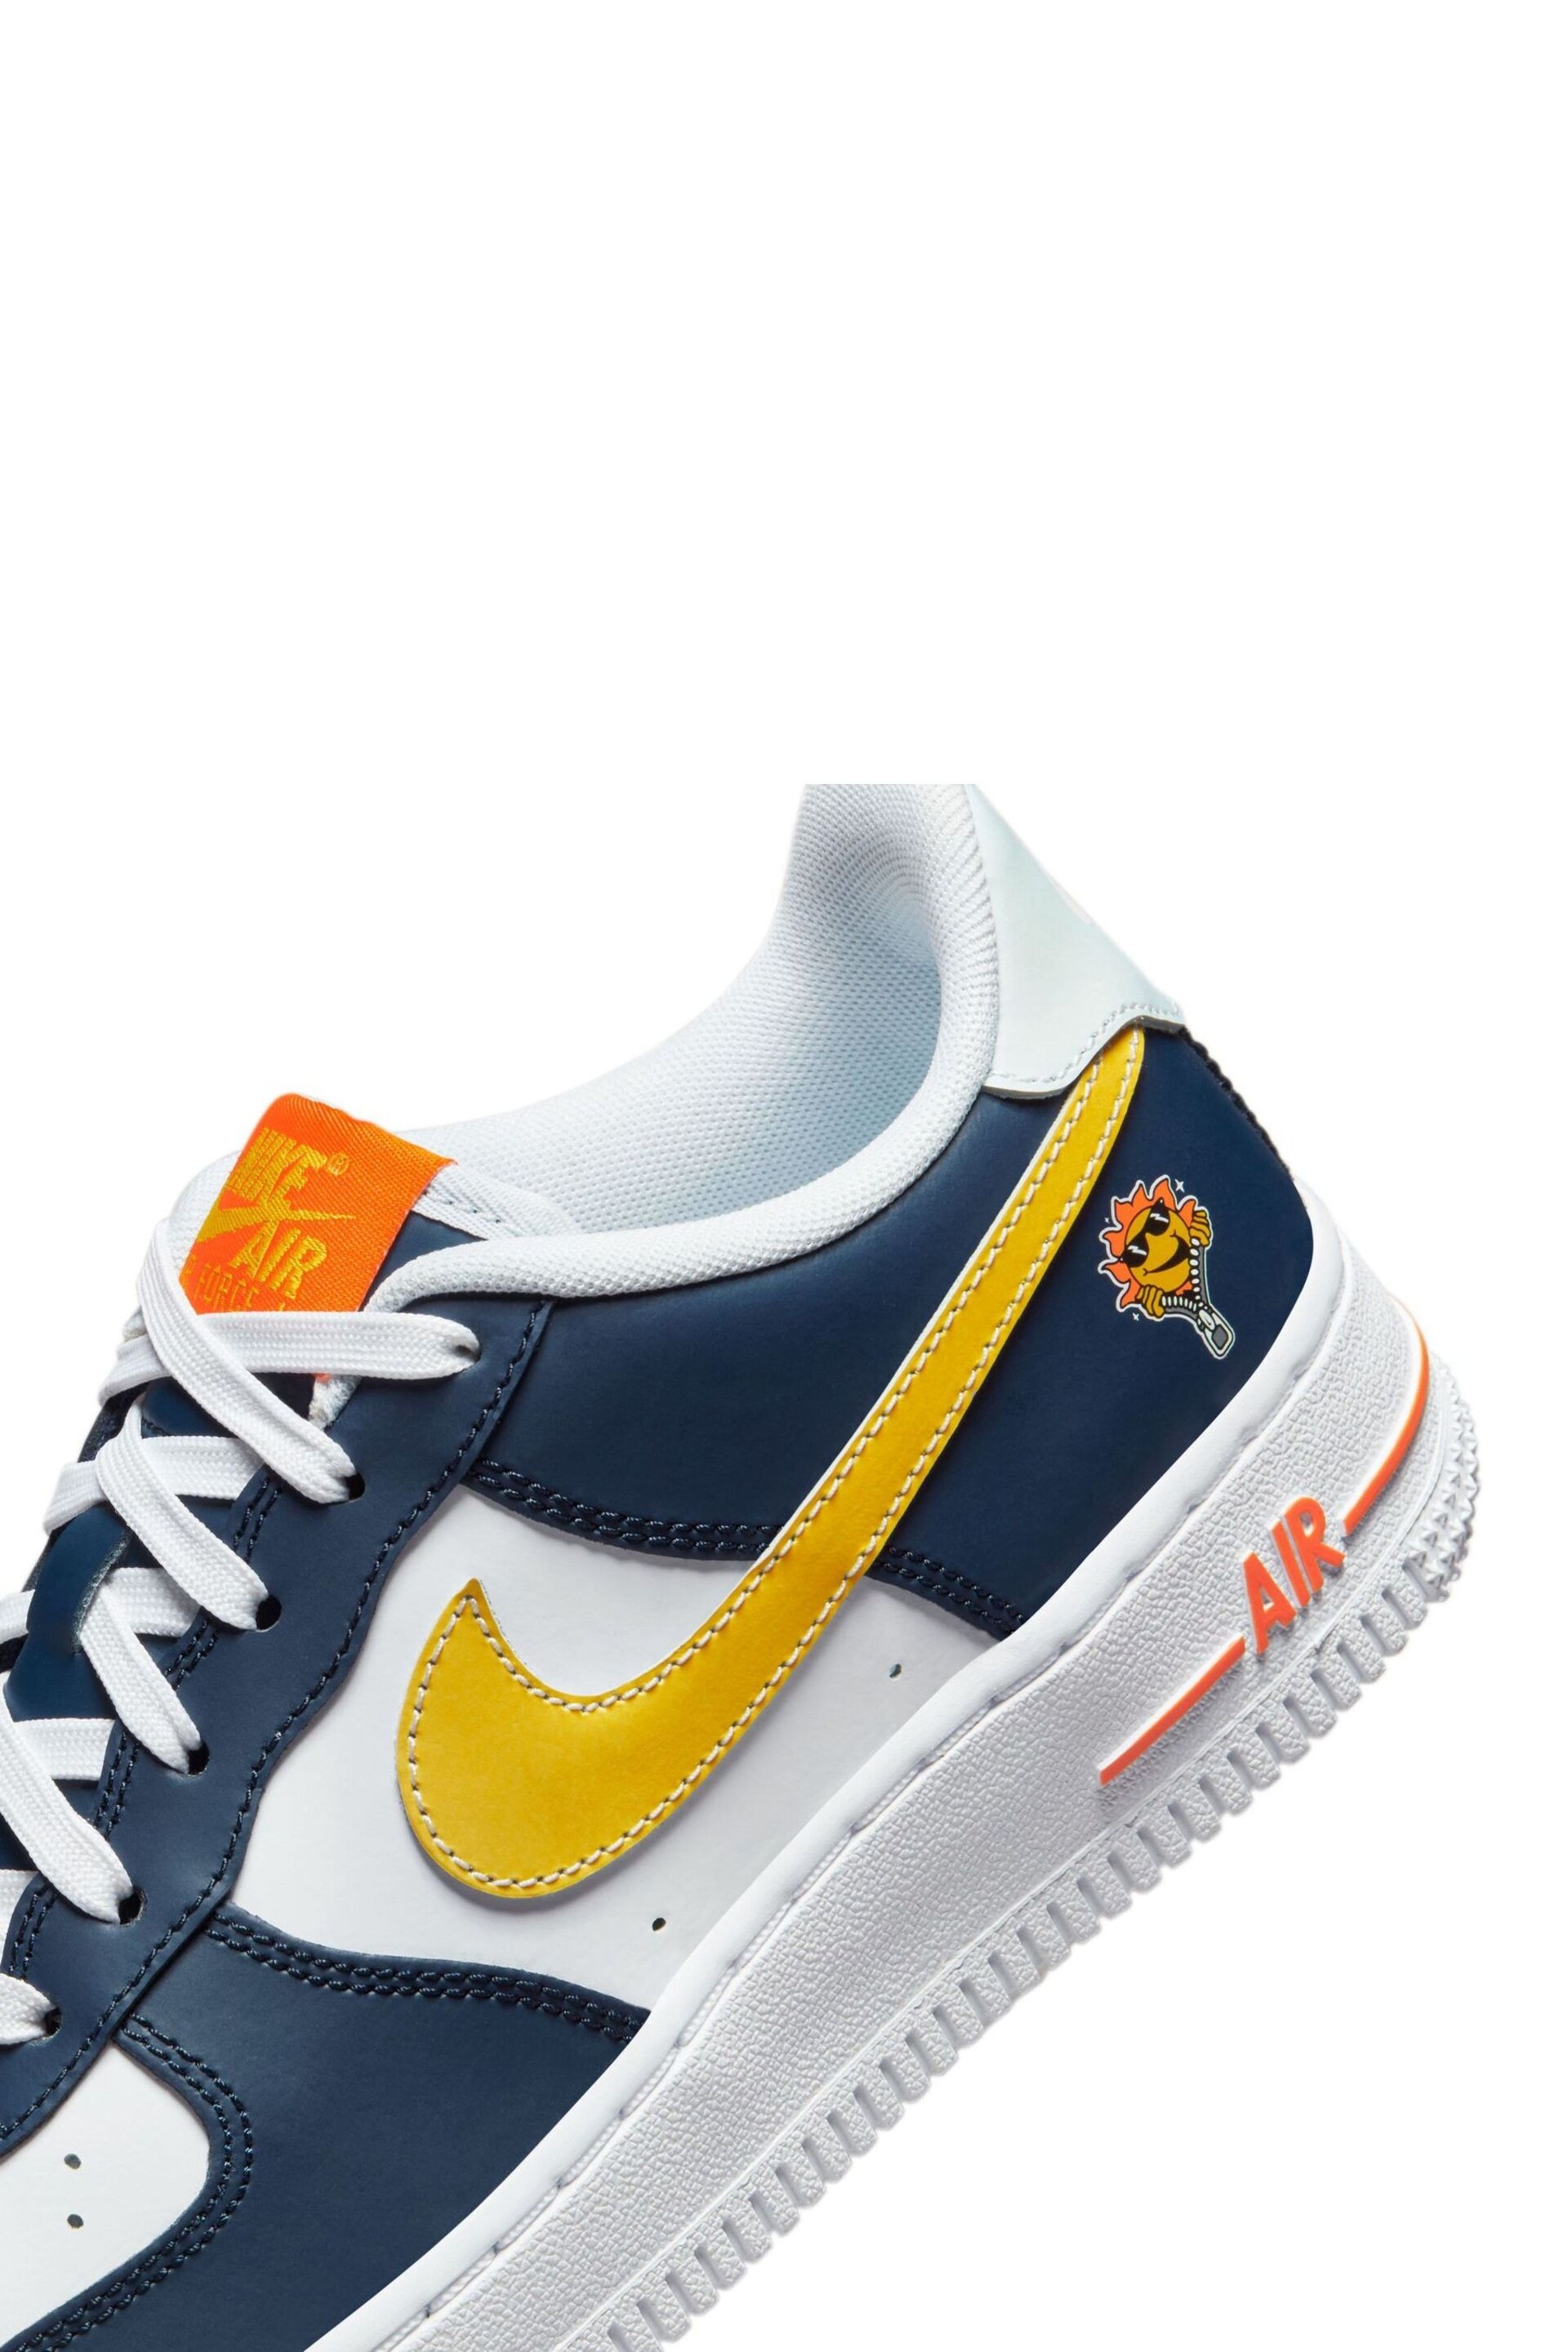 Nike Blue Air Force 1 LV8 2  Youth Trainers - Image 10 of 12